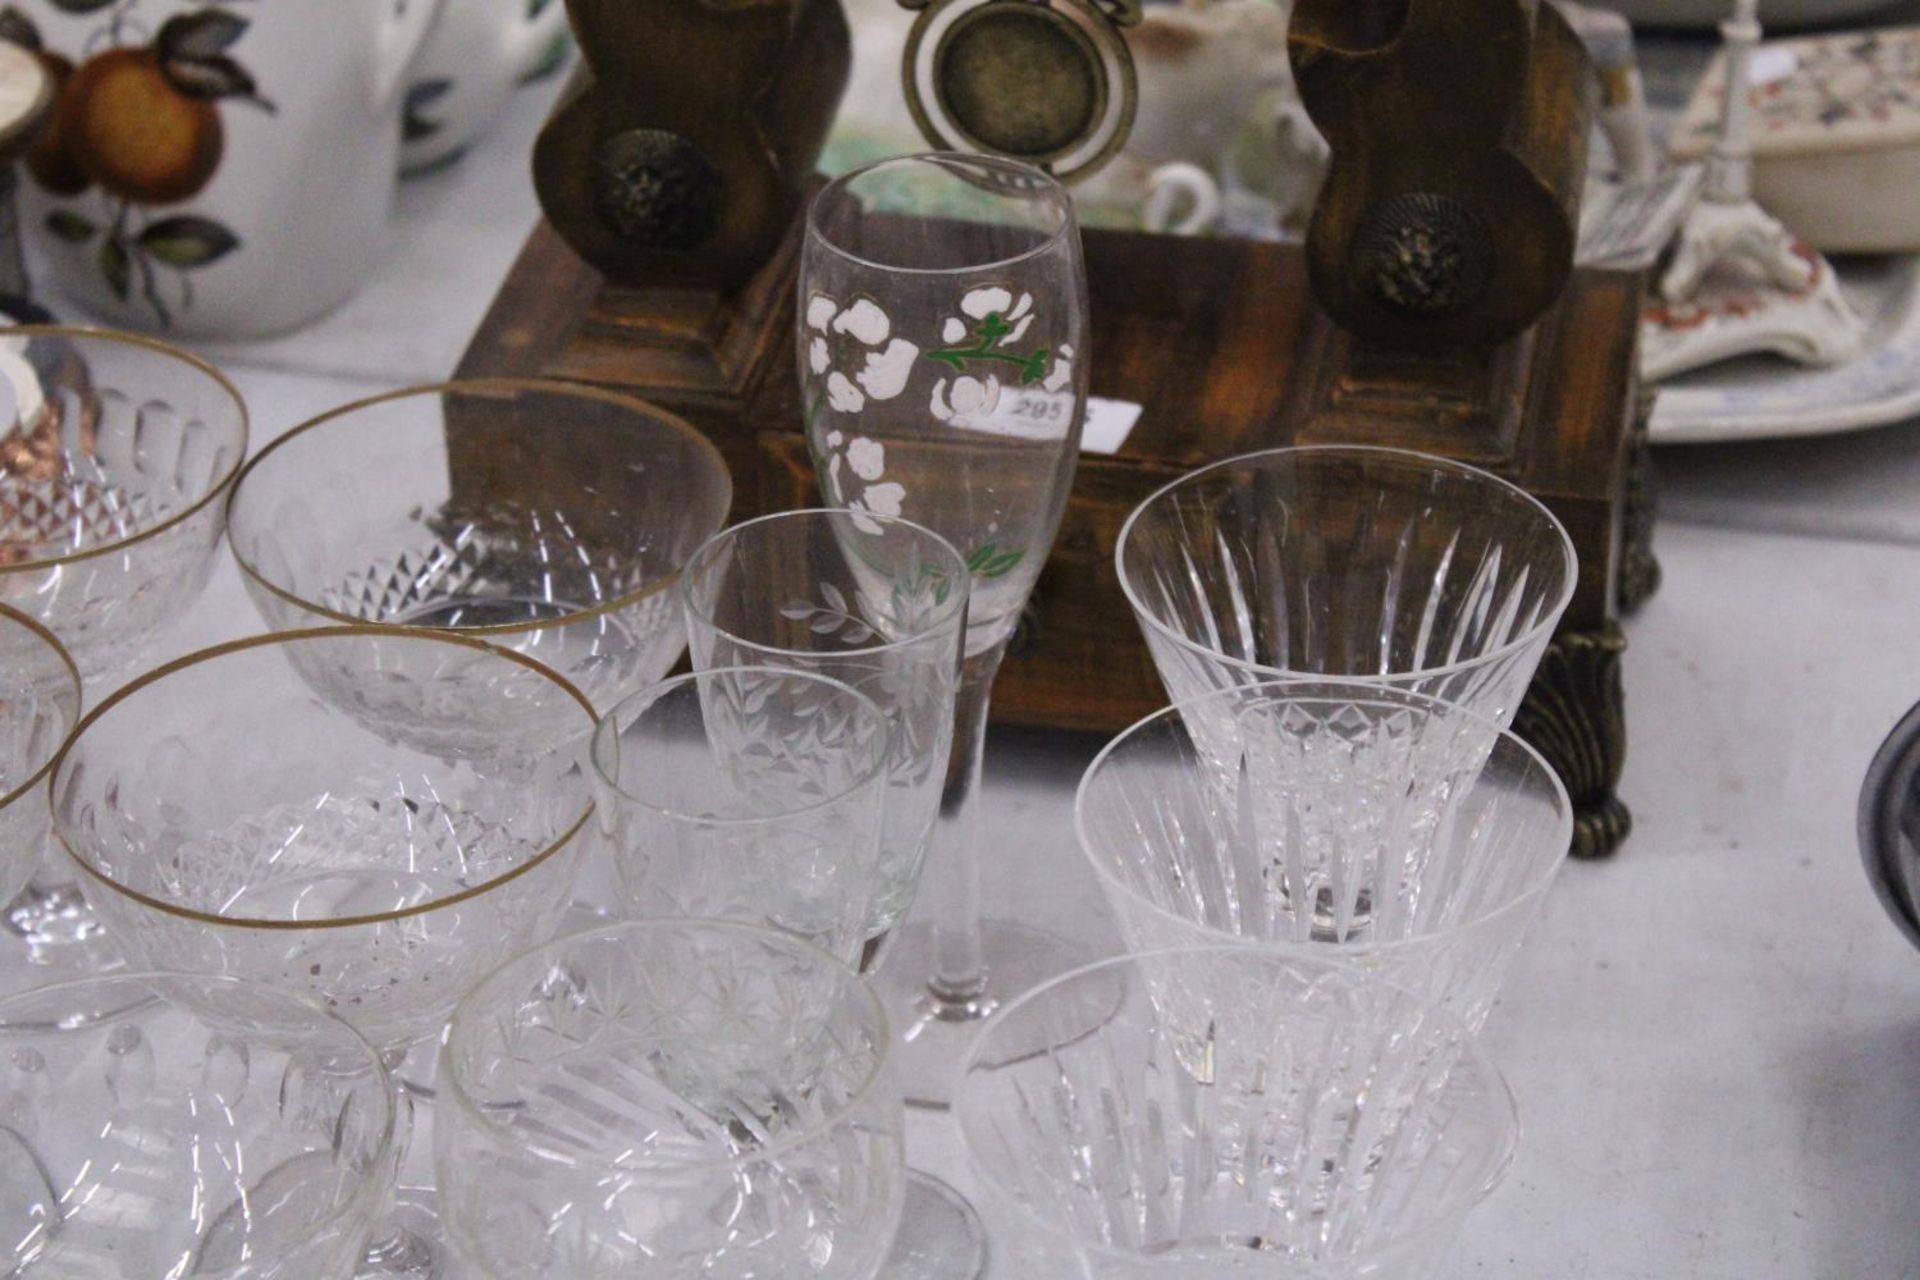 A COLLECTION OF GLASSWARE TO INCLUDE WINE GLASSES, COCKTAIL GLASSES, TUMBLERS ETC - Image 5 of 5